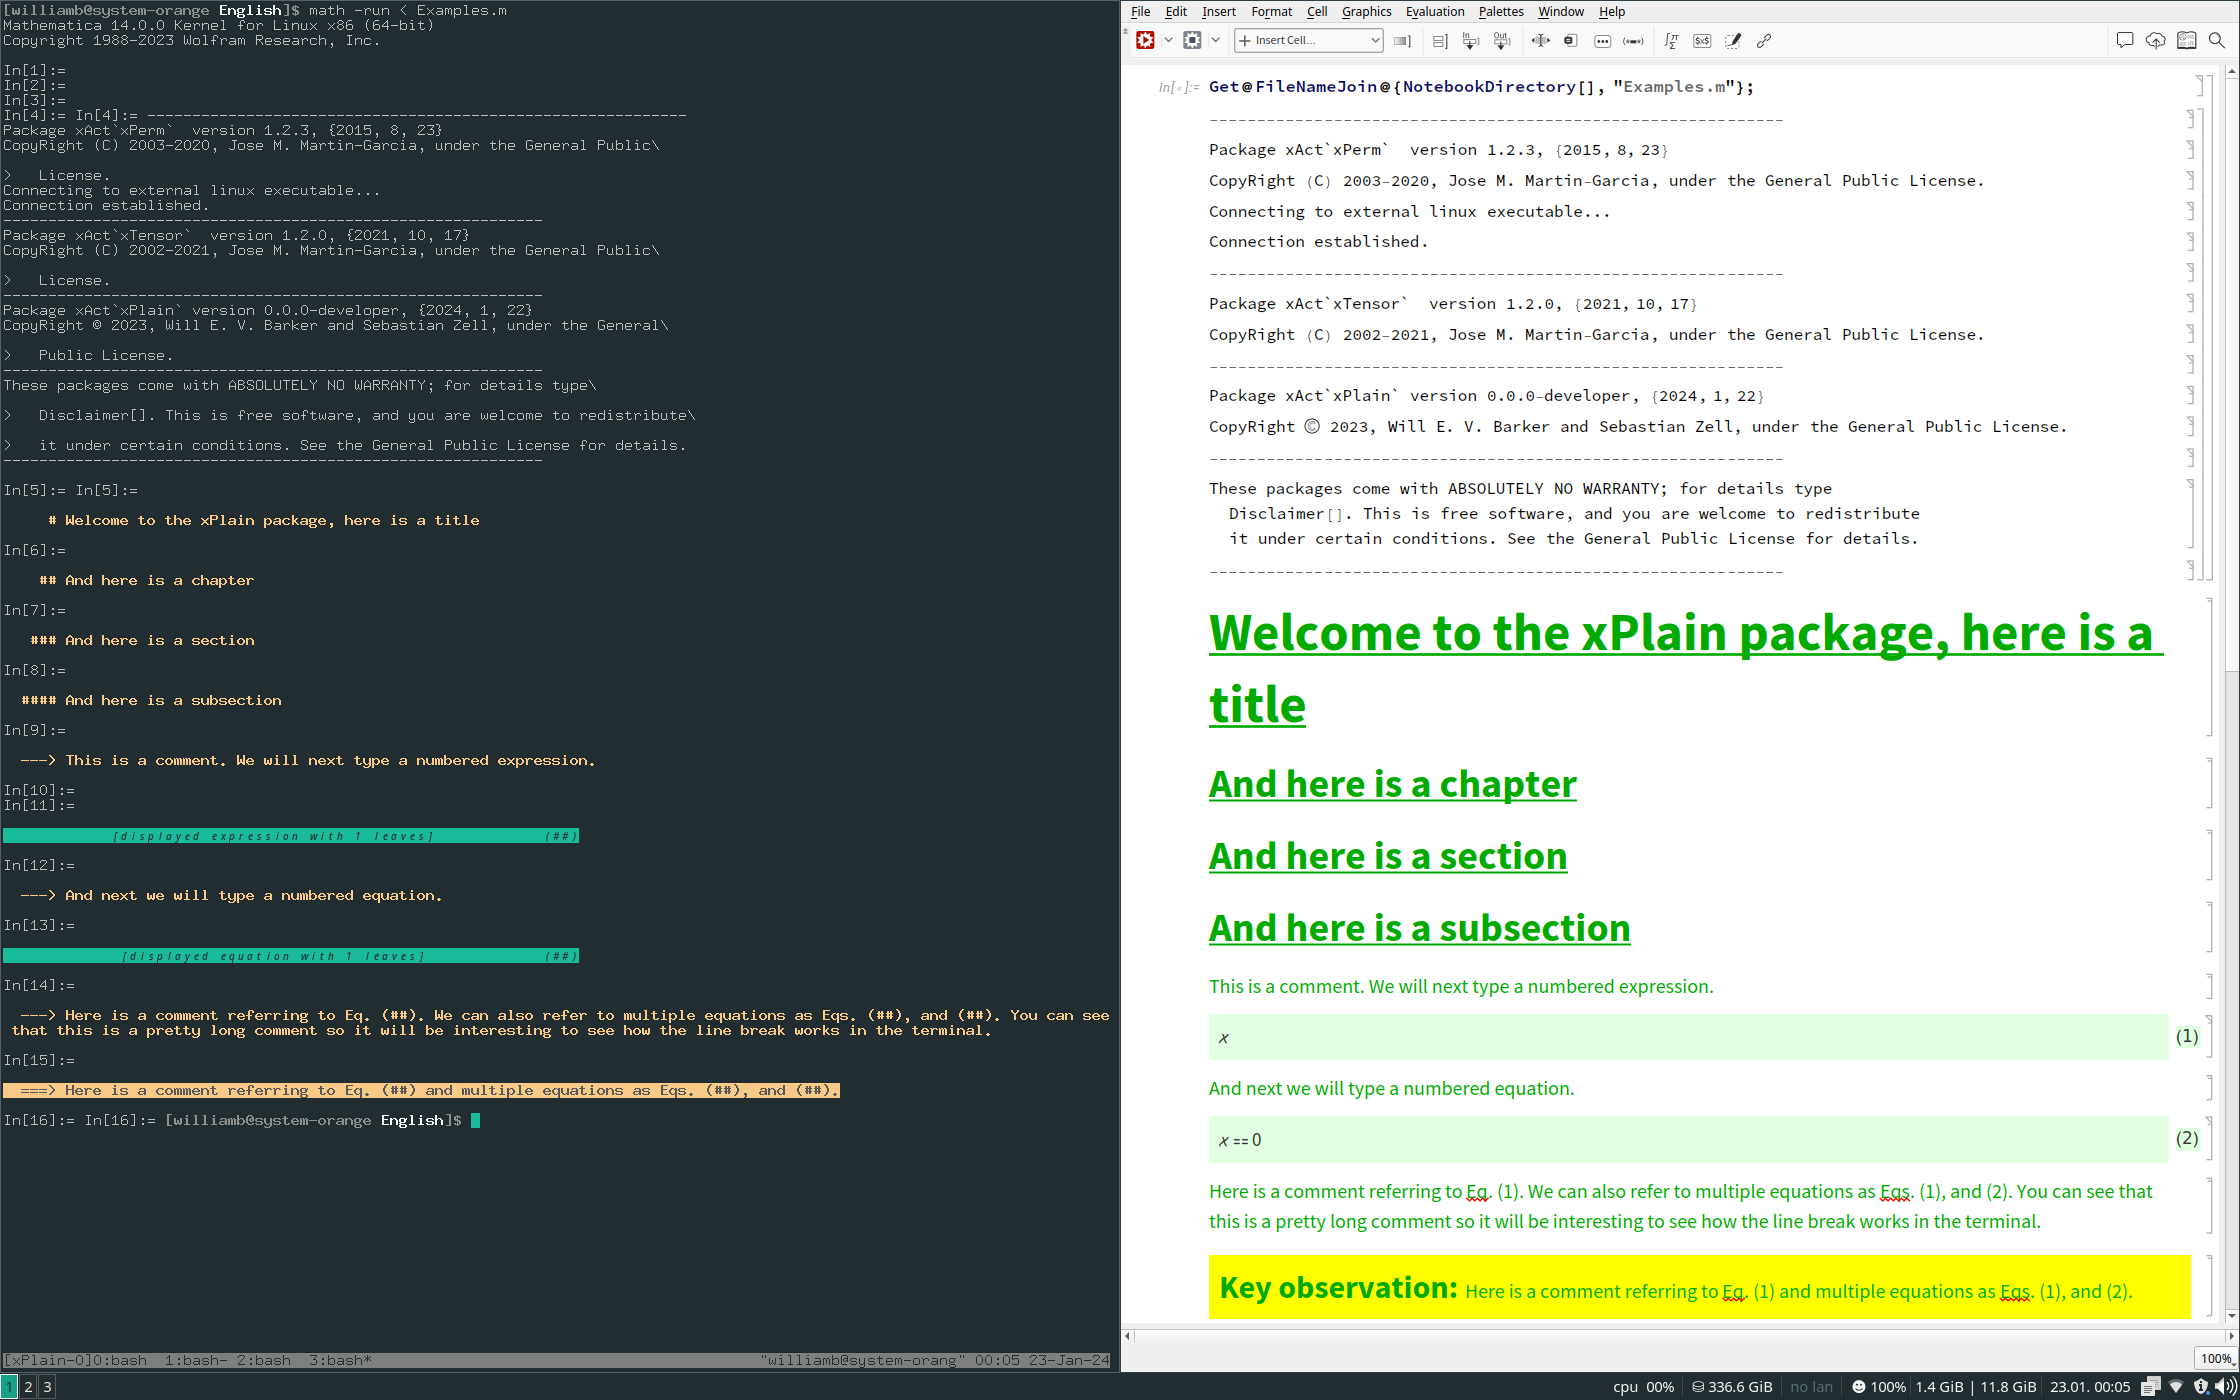 Example use of xPlain in the command line (CLI, left) and notebook front-end (GUI, right).